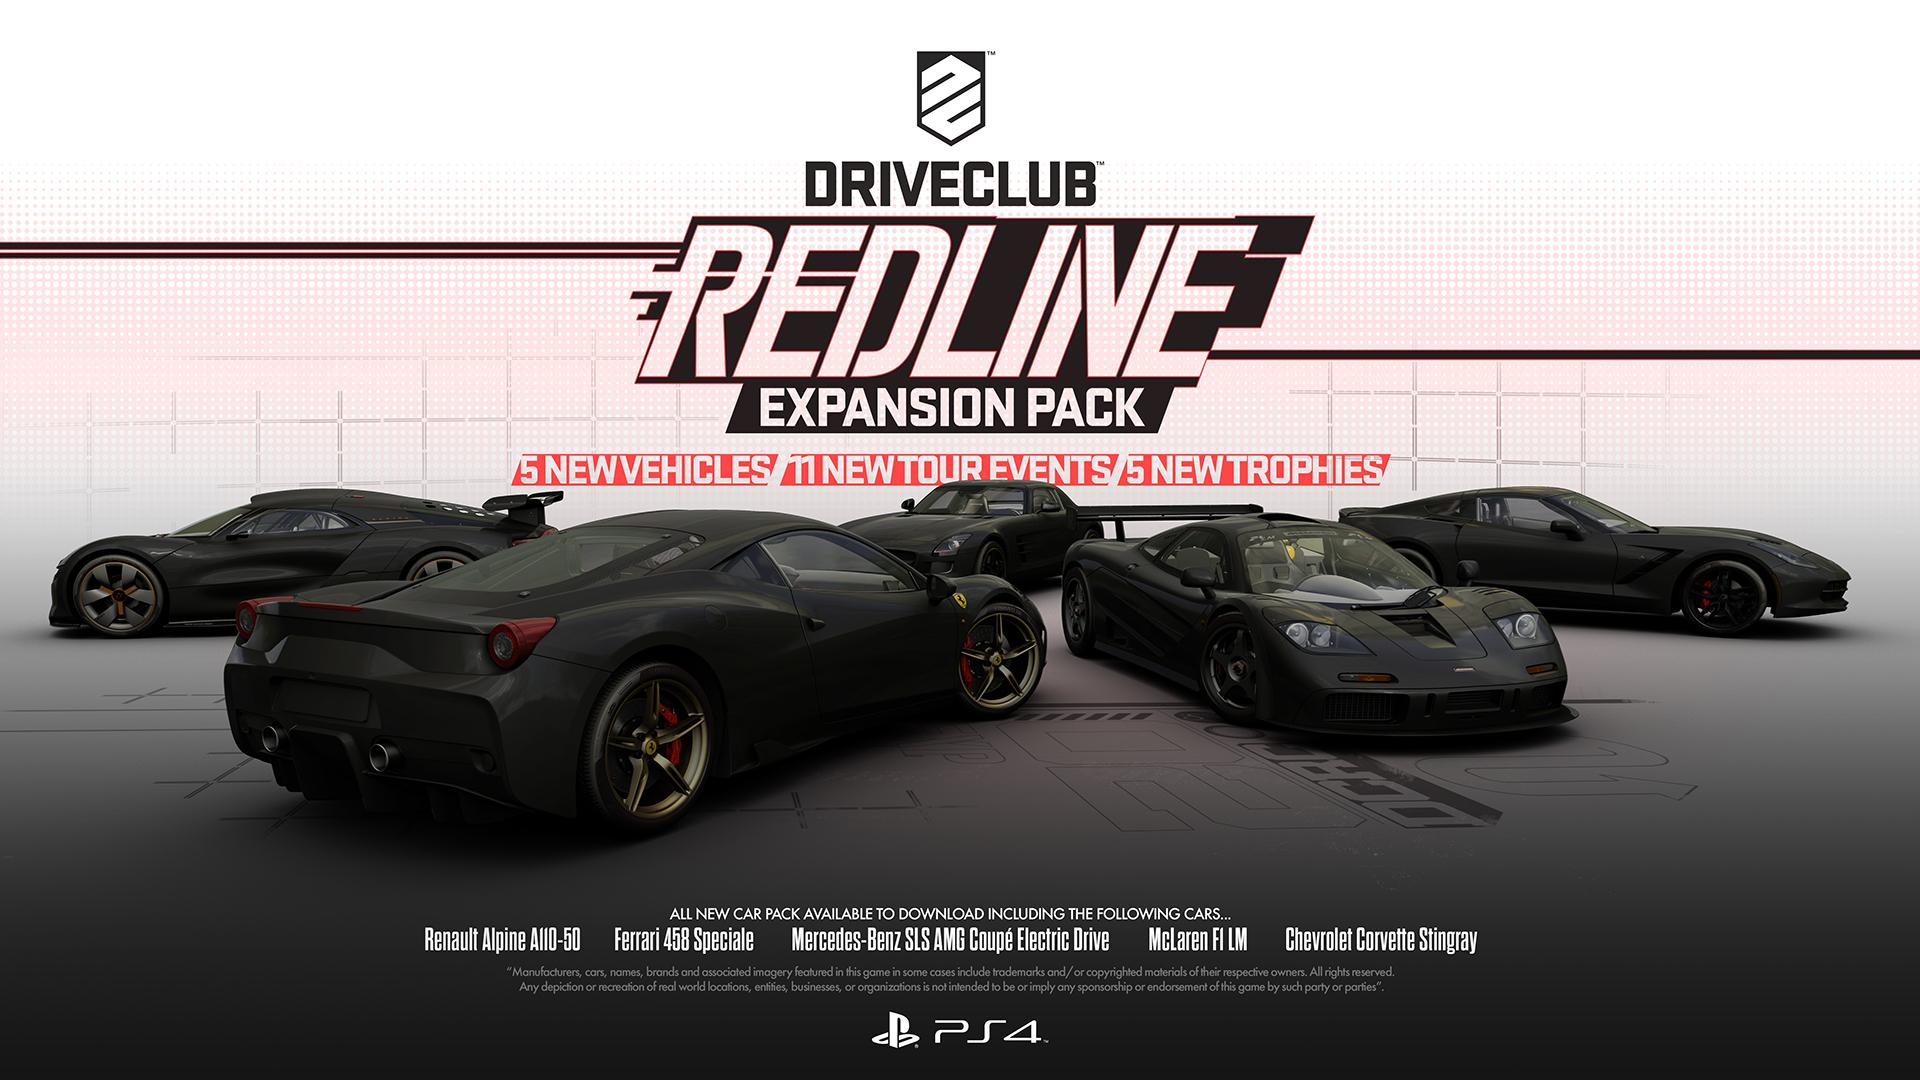 DriveClub-Redline-Expansion-Revealed-in-Video-Five-New-Cars-Coming-467360-10.jpg